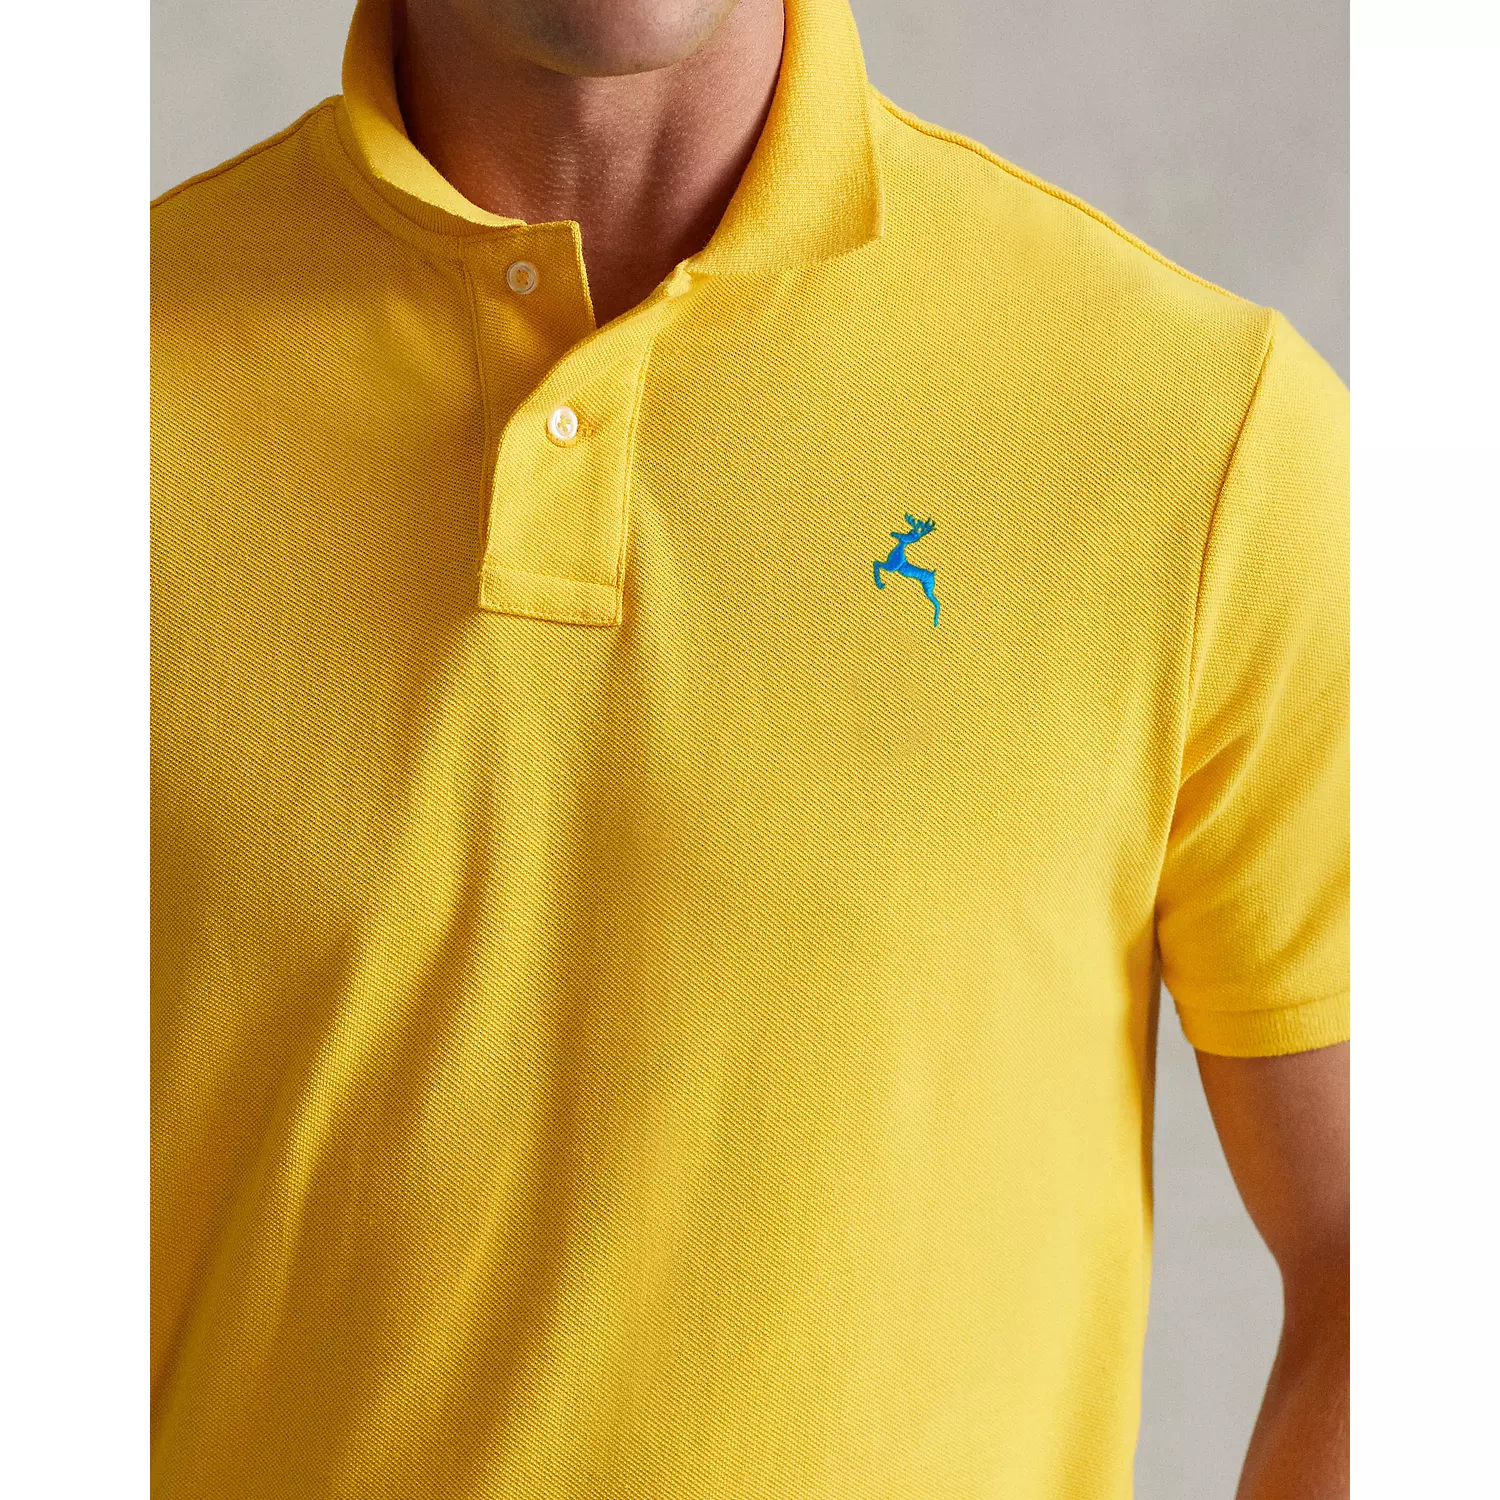 Polo T shirt - Yellow hover image